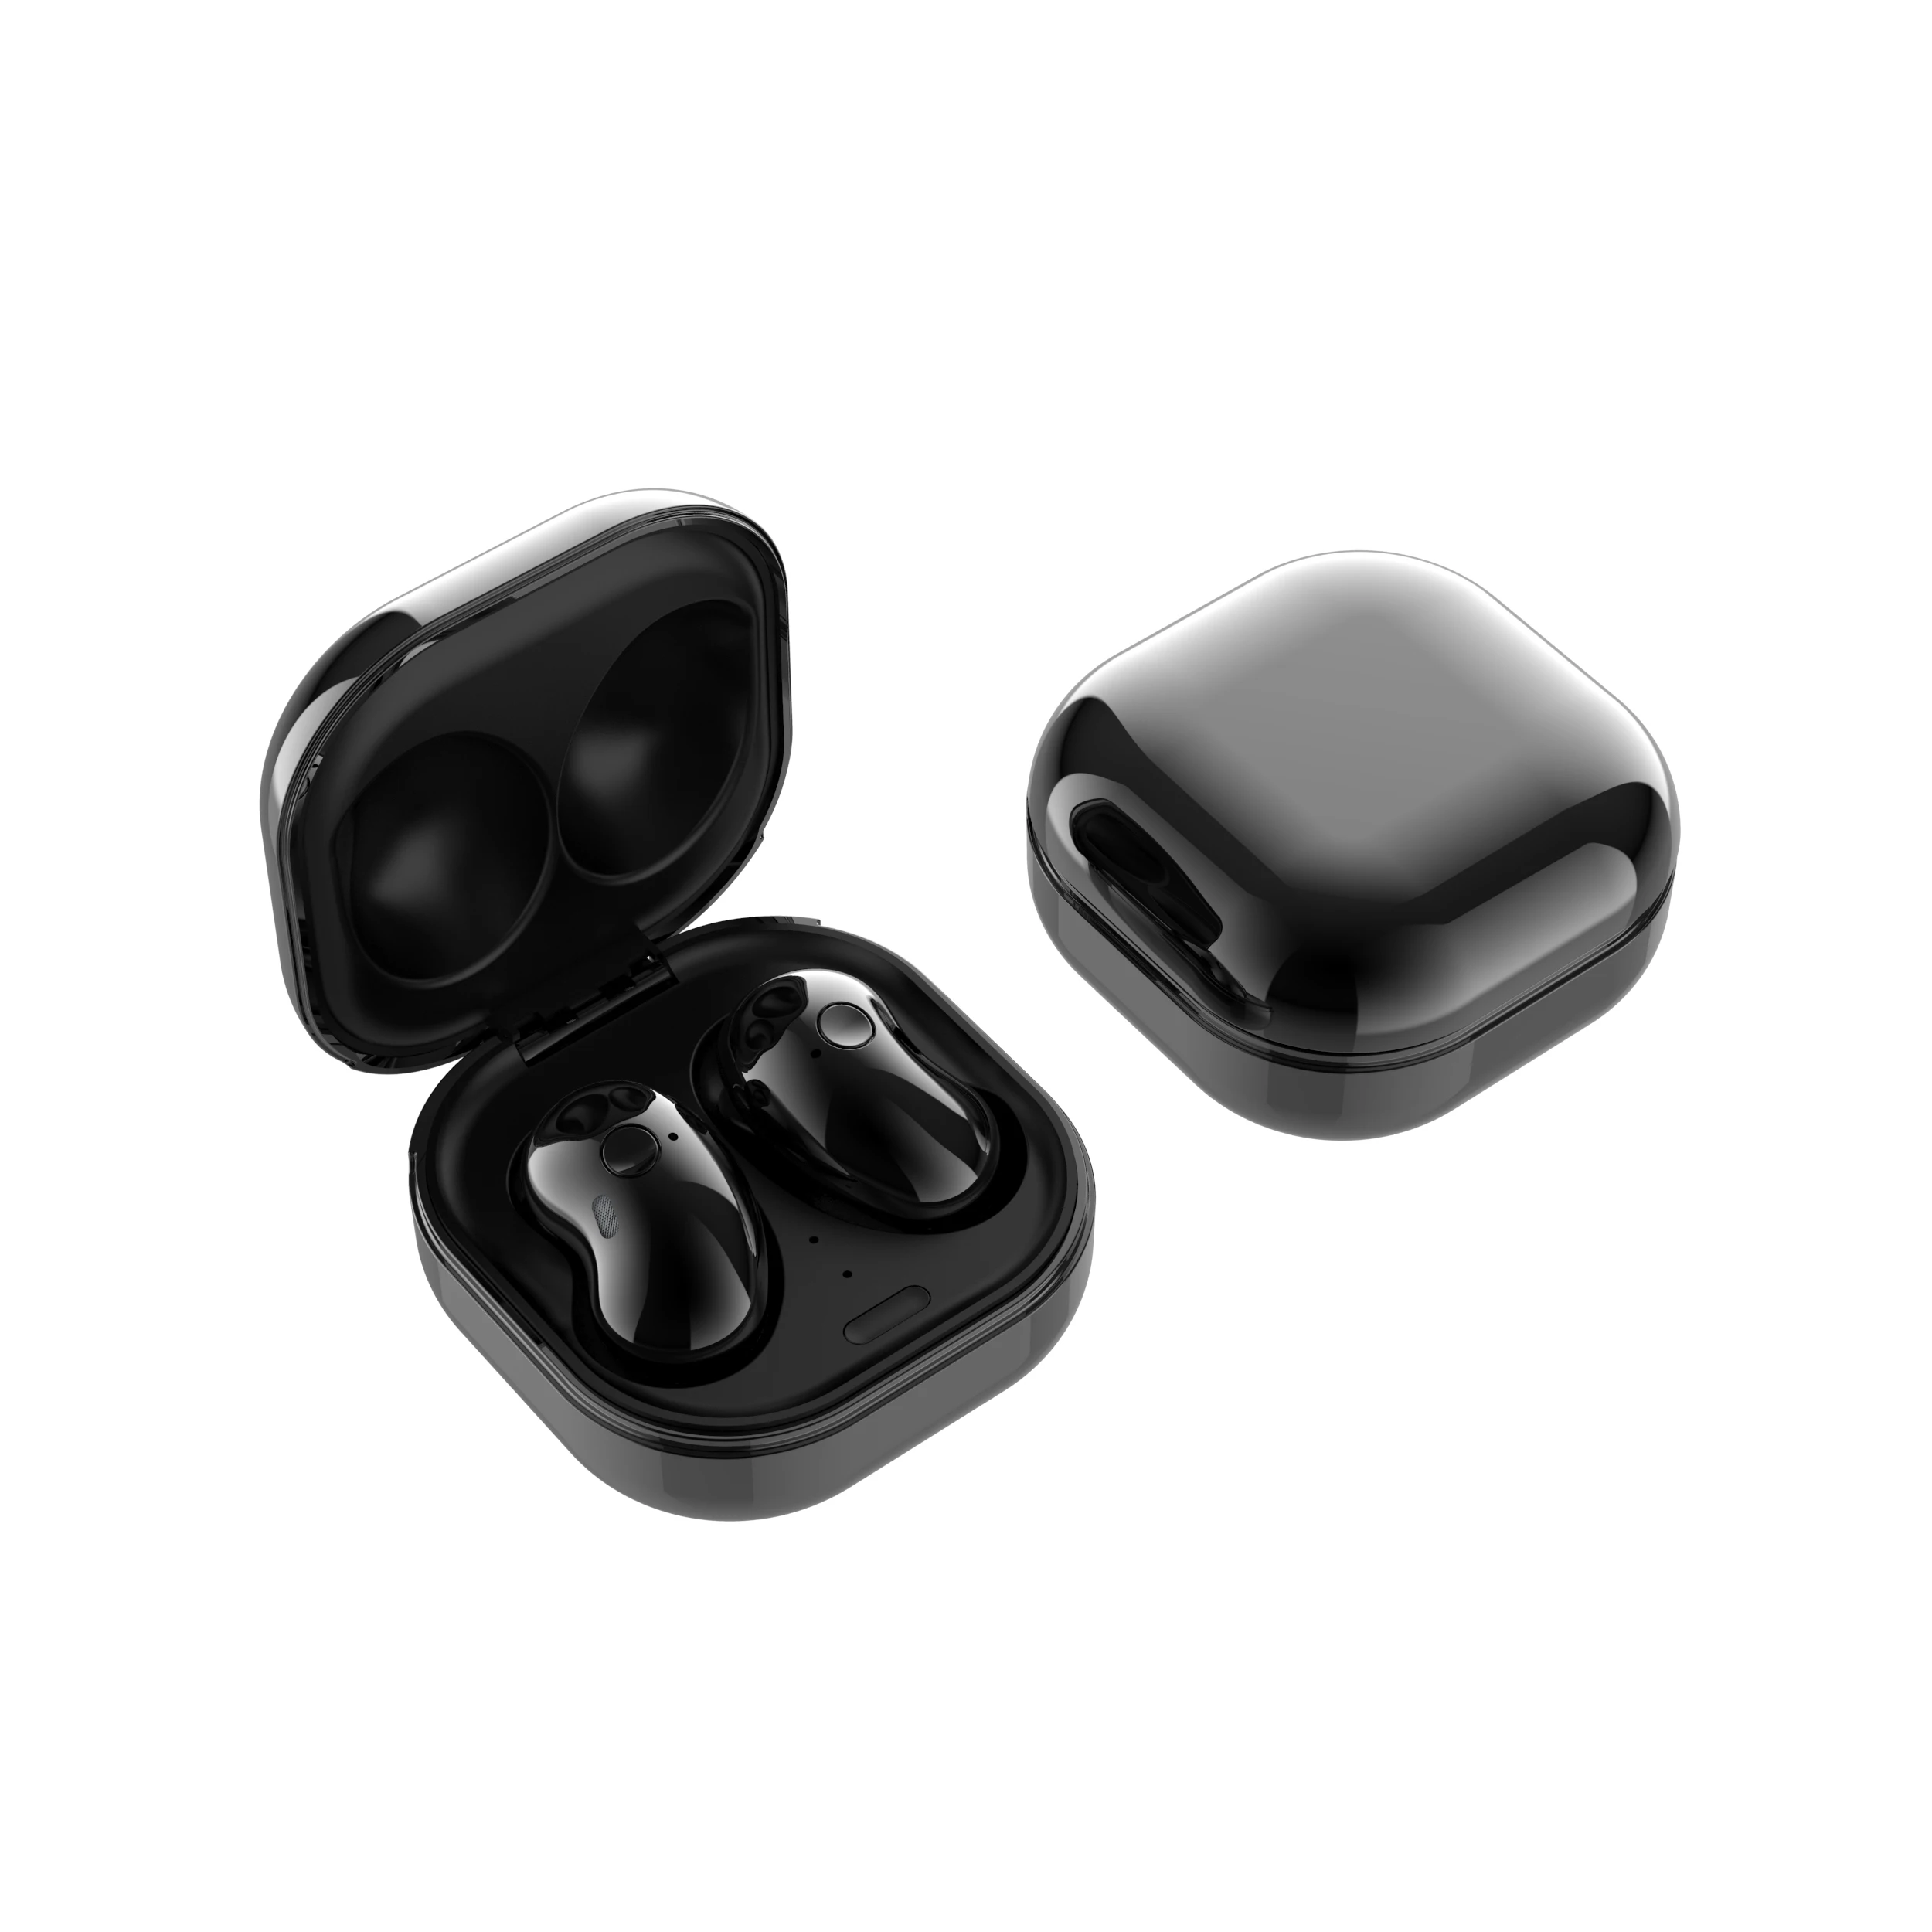 

New Hot Promotion S6 TWS 5.0 Earbuds with mic Touch LED Wireless Waterproof Earphone, Black, white, green, pink, blue